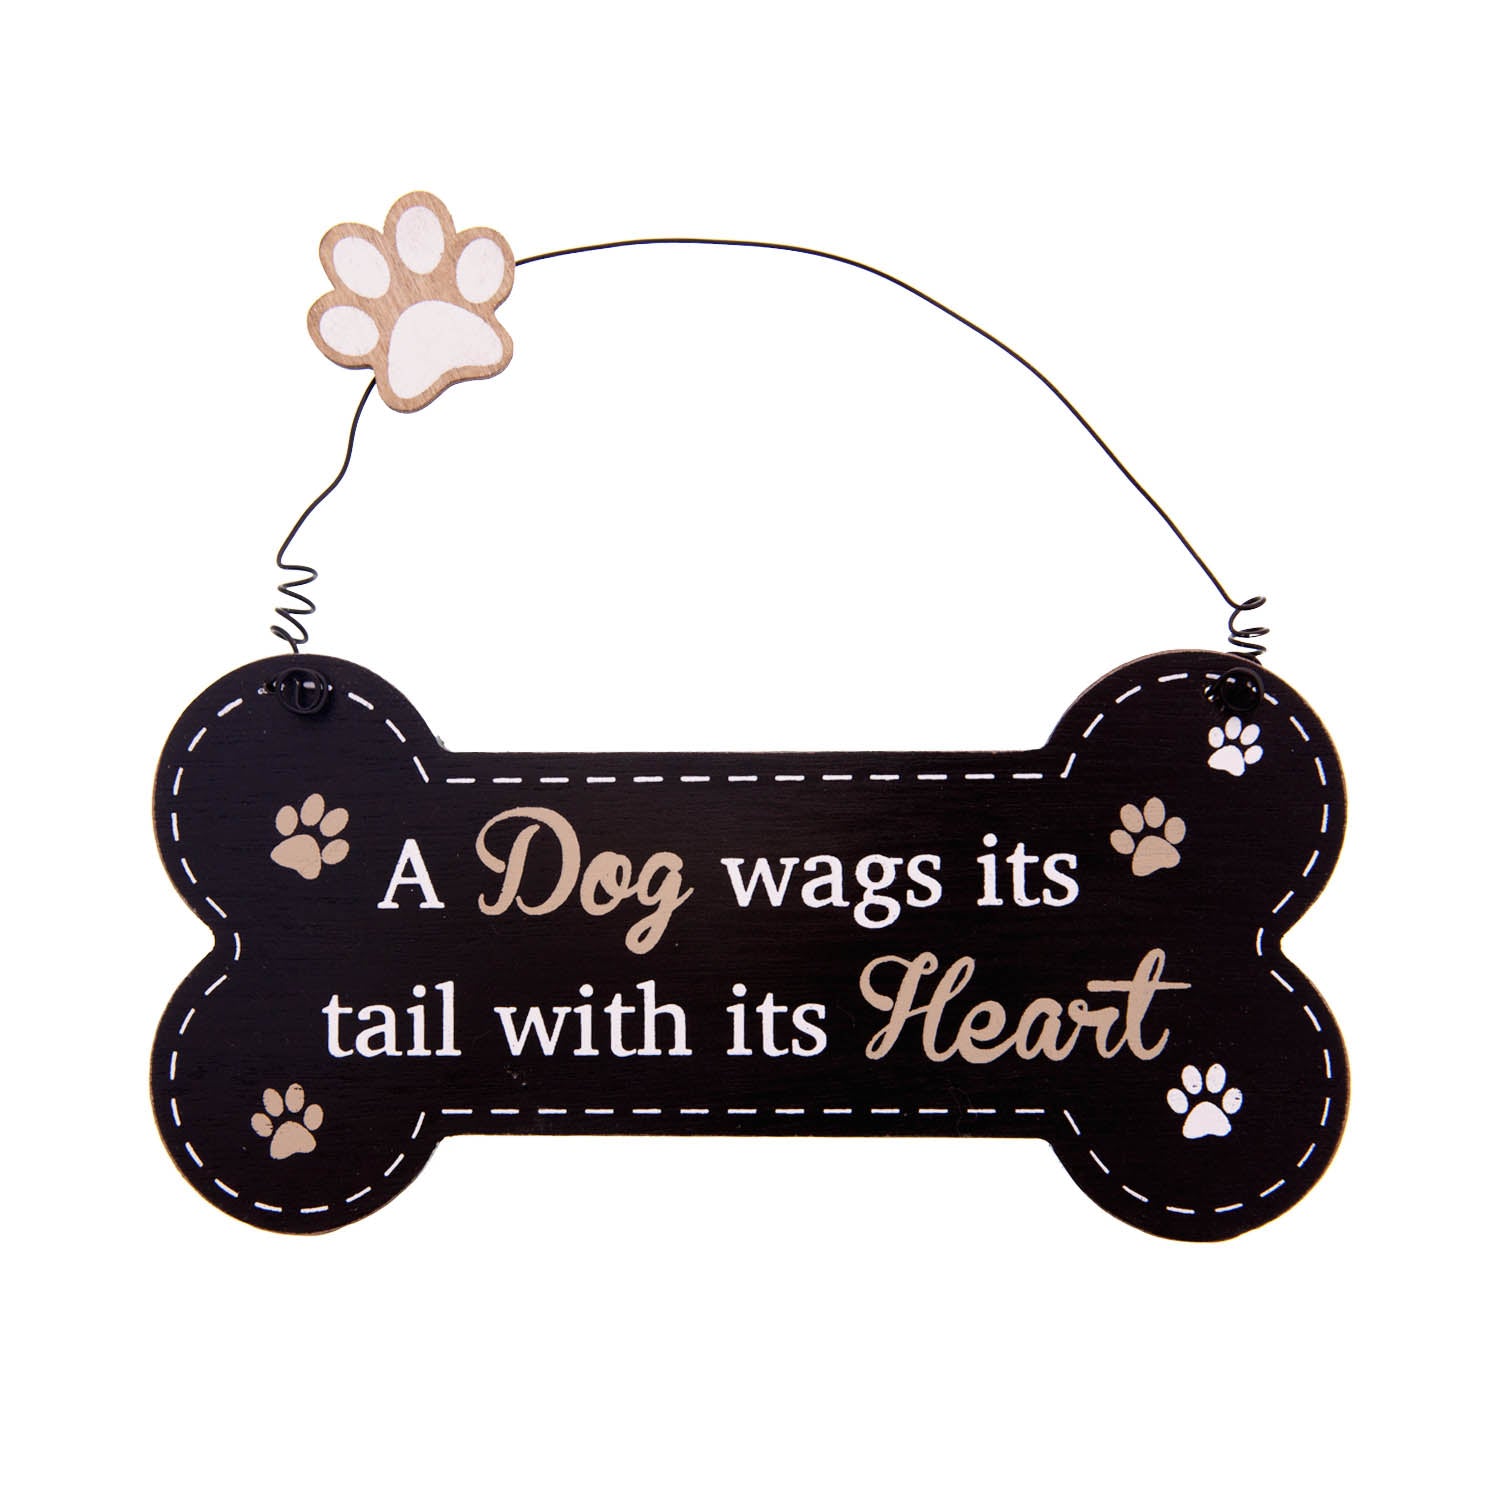 DogKrazyGifts - Doggie Pals Hanging Bone - A Dog wags its tail with its Heart - part of the range of Dog Themed Signs available from Dog Krazy Gifts